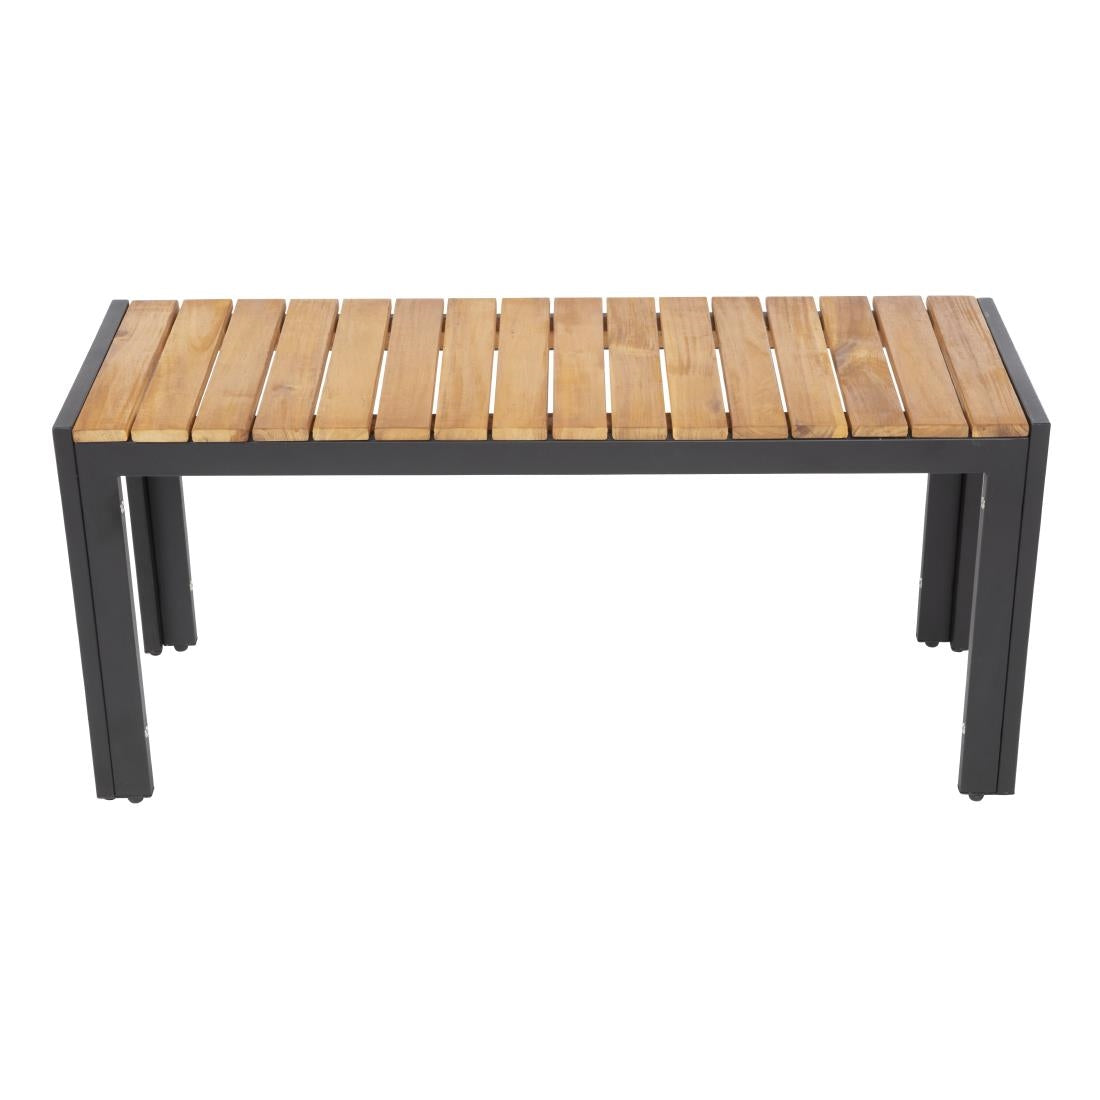 Bolero Rectangular Steel and Acacia Benches 1000mm (Pack of 2) JD Catering Equipment Solutions Ltd